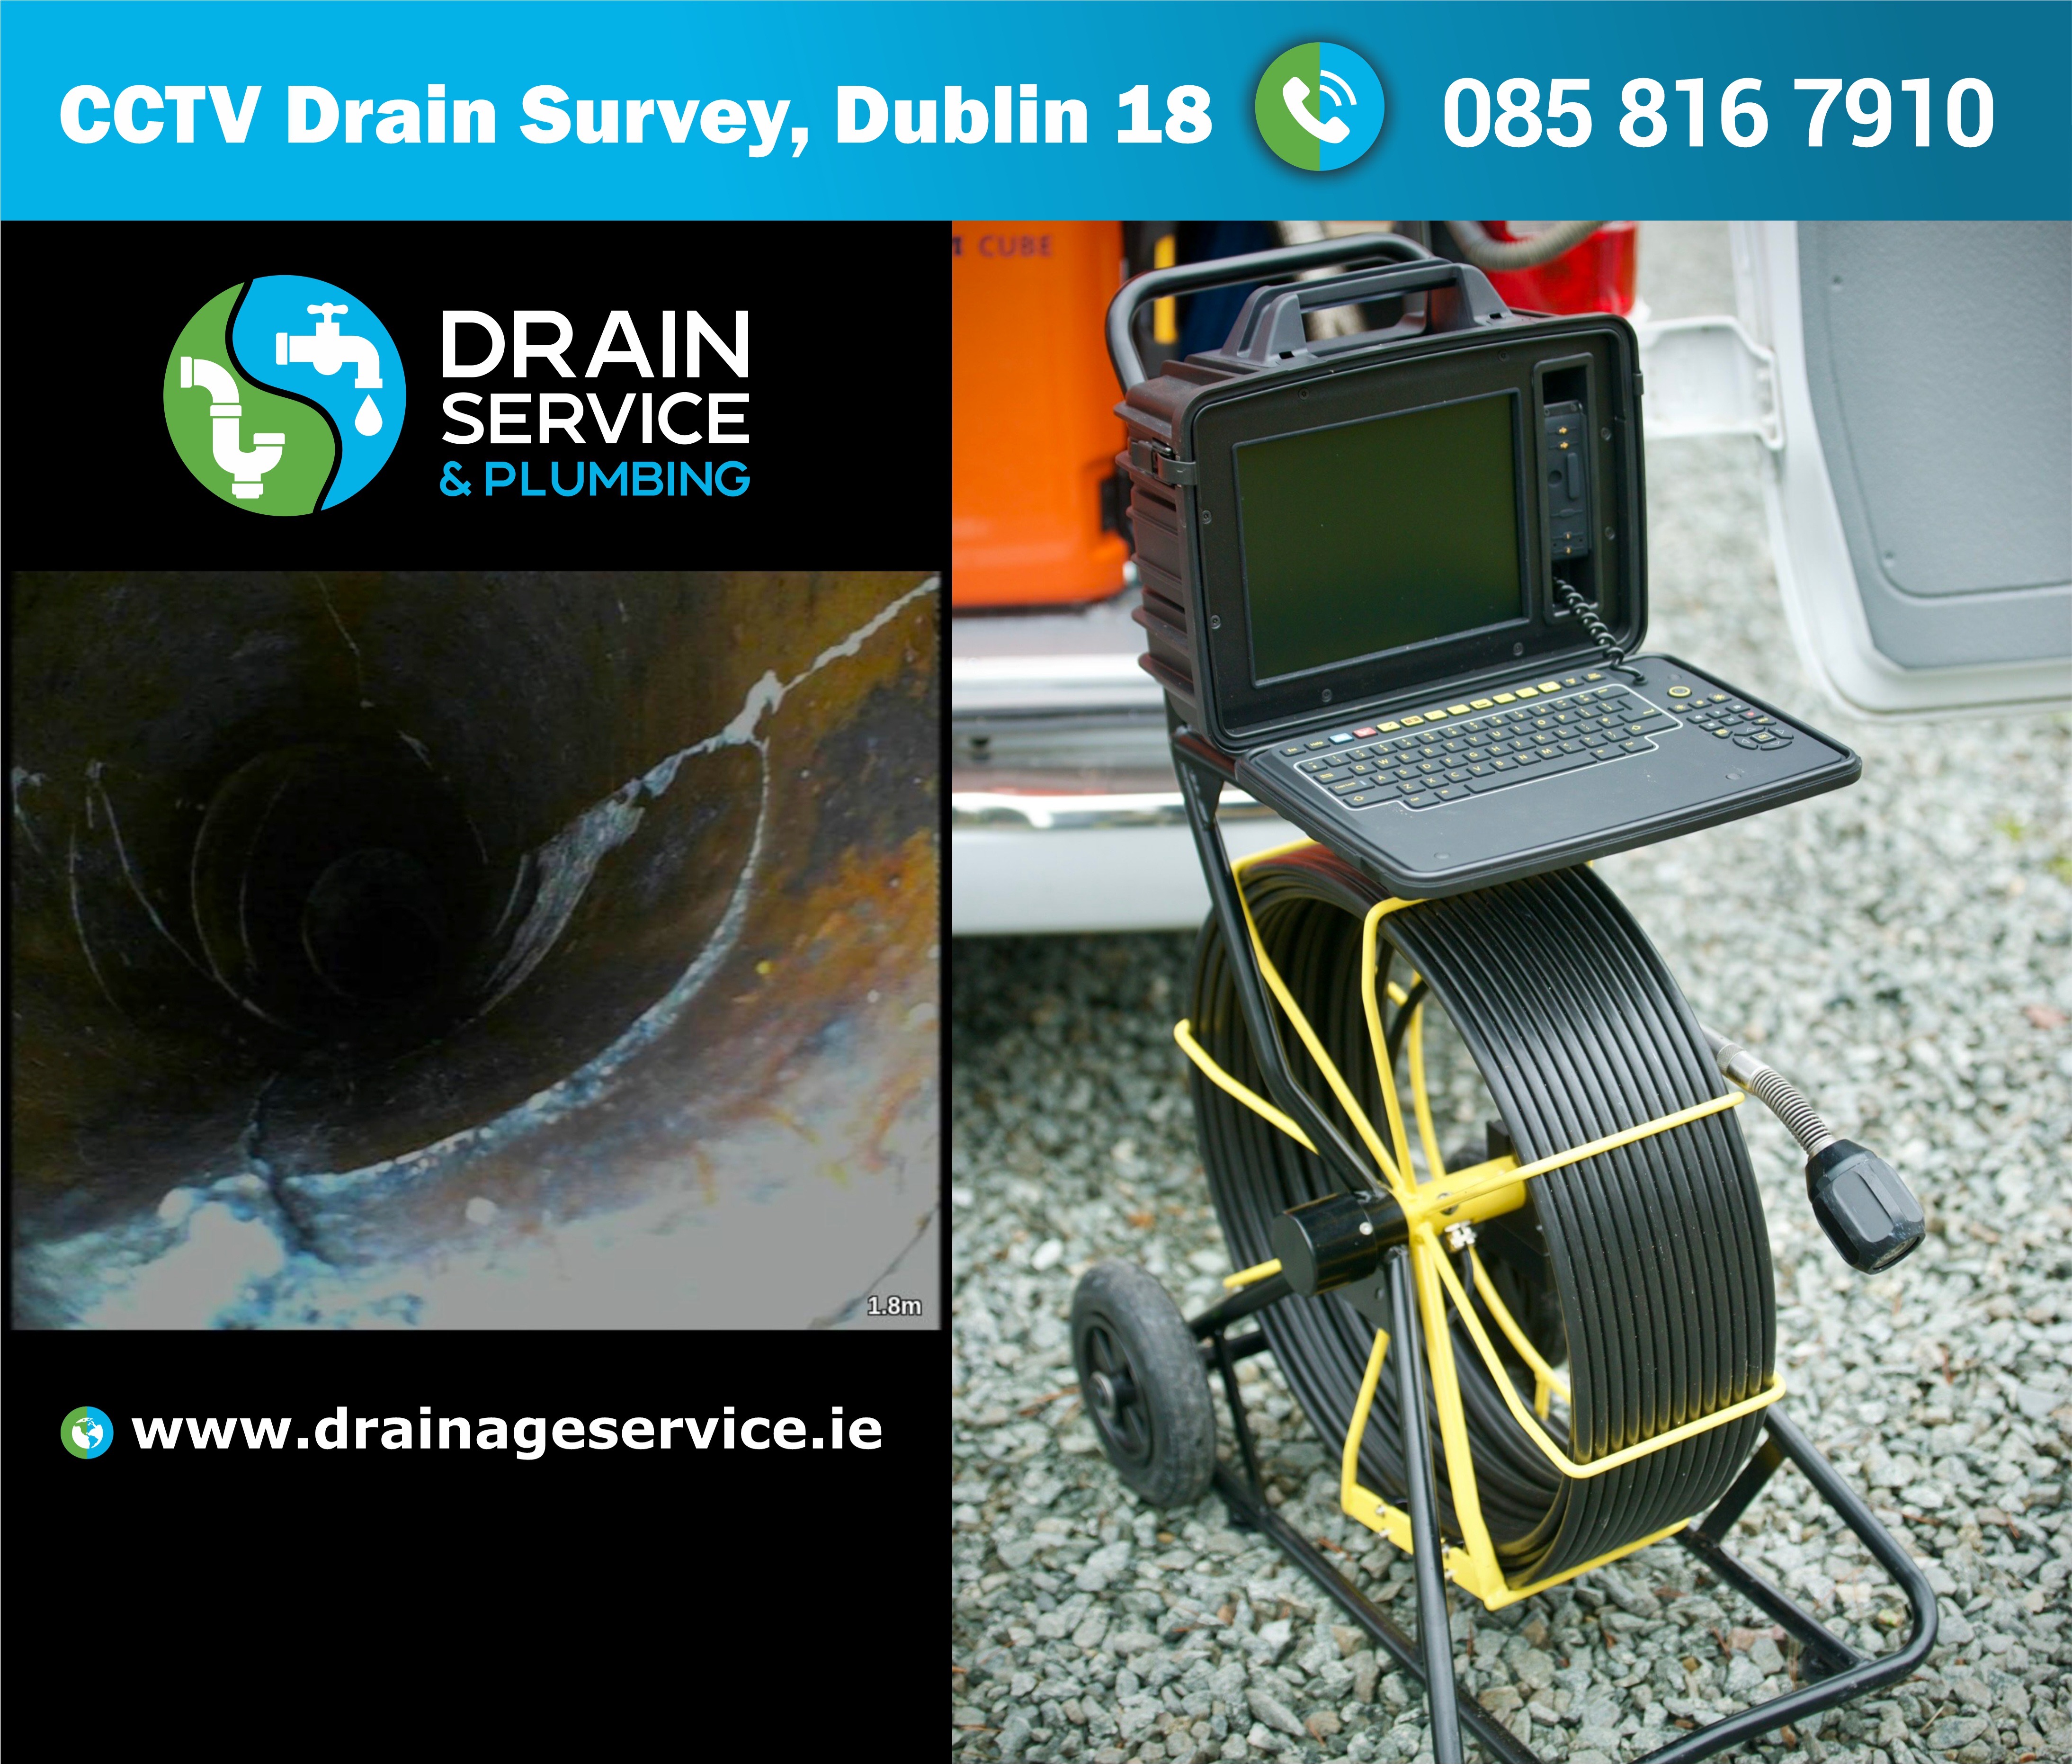 Drain Jetting, Cleaning, Unblocking

CCTV Drain Survey

Unblocking Toilet, Sink, Shower

Drain and L Drain Service and Plumbing Dublin 085 816 7910